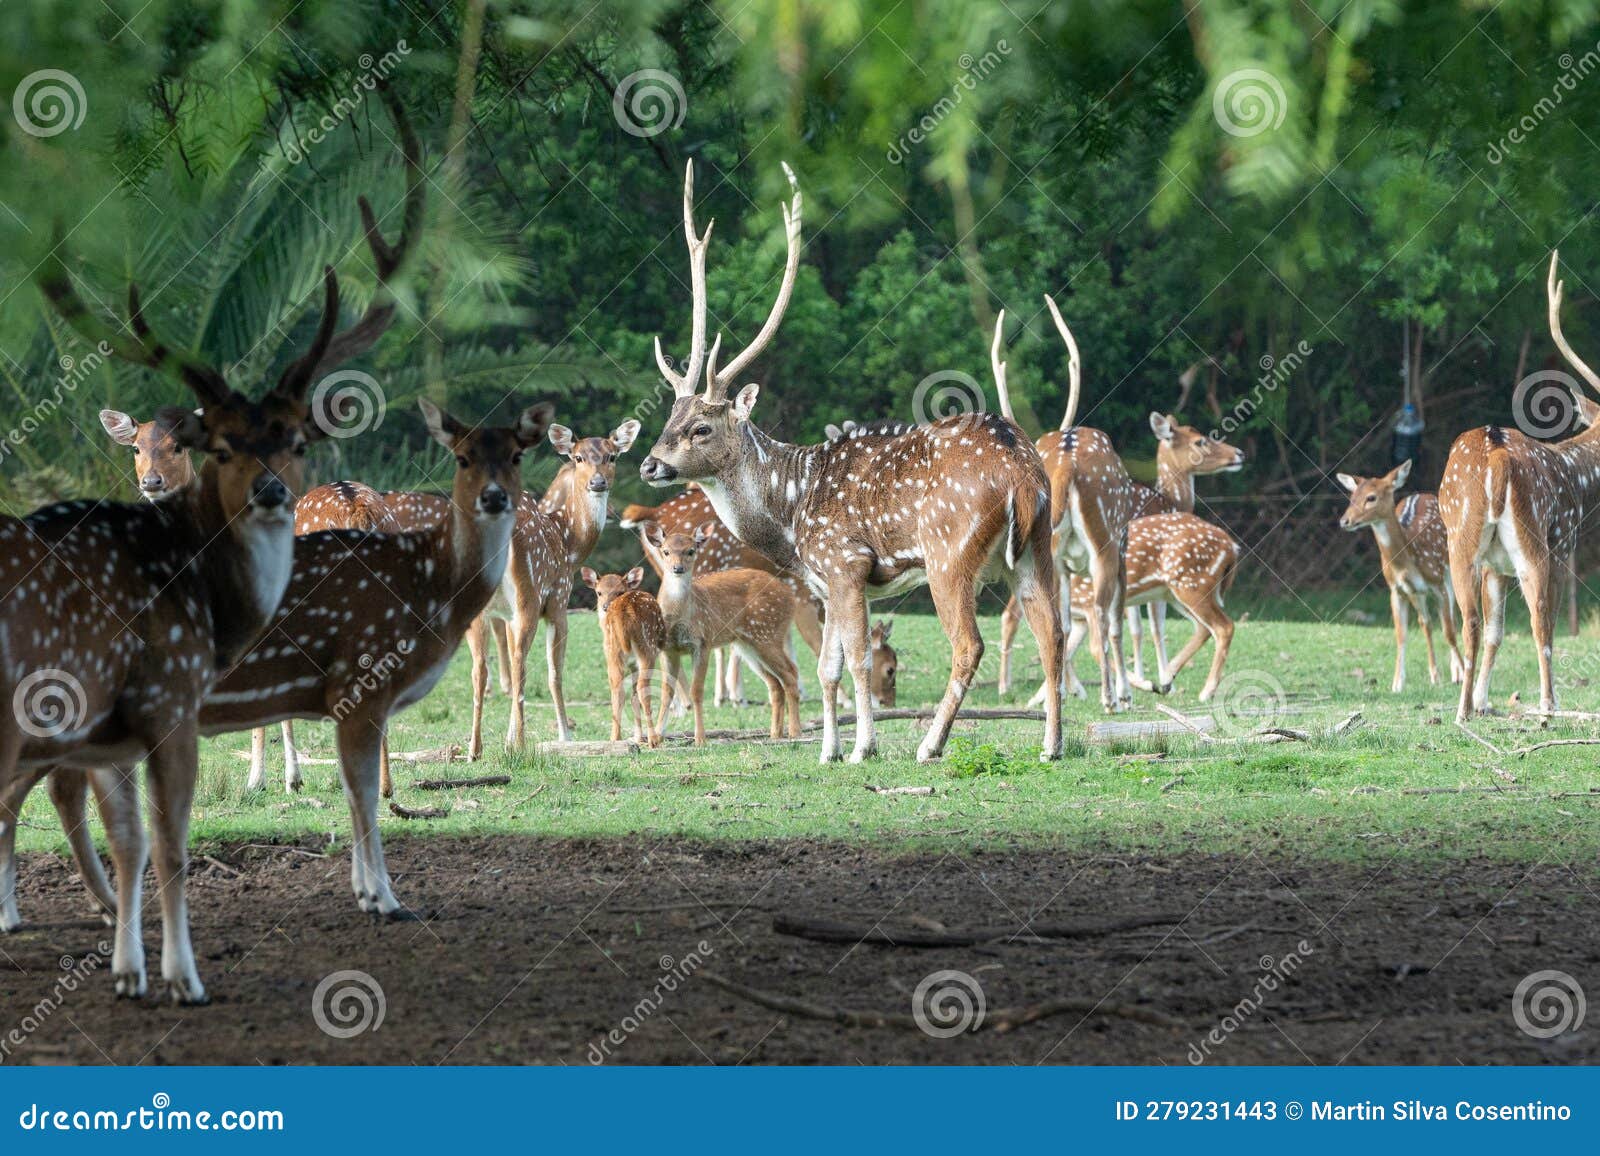 axis deer in the parque zoologico lecoq in the capital of montevideo in uruguay.